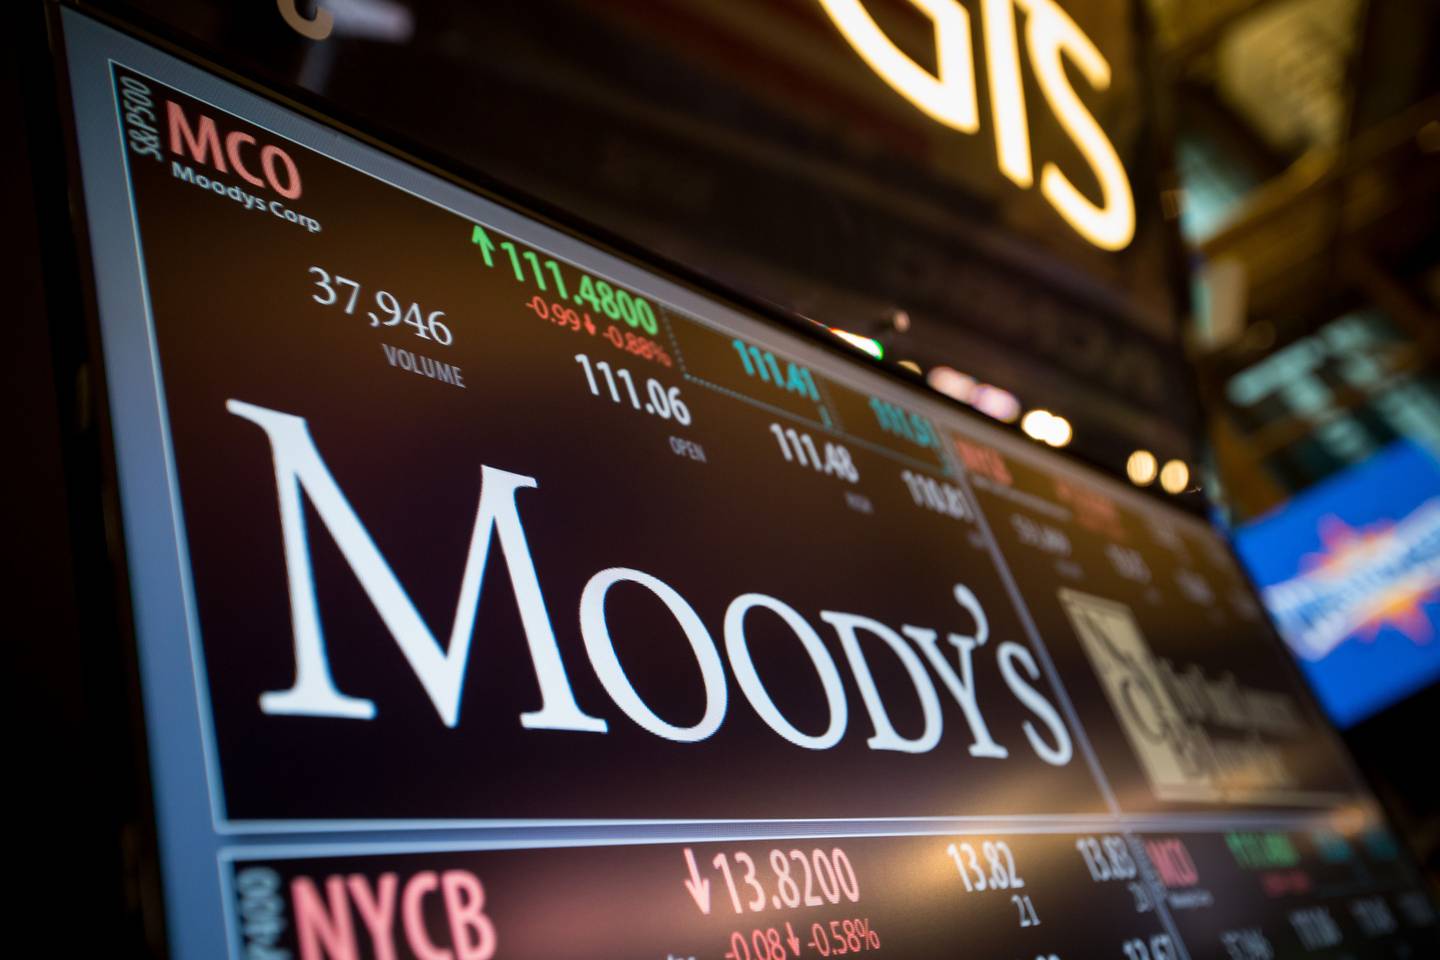 A monitor displays Moody's Corp. signage on the floor of the New York Stock Exchange (NYSE) in New York, U.S., on Monday, March 27, 2017. U.S. stocks fell, extending a decline on Friday after President Trump failed to pass his health-care bill, undermining optimism he can enact growth policies that invigorated bulls after the election. Photographer: Michael Nagle/Bloomberg